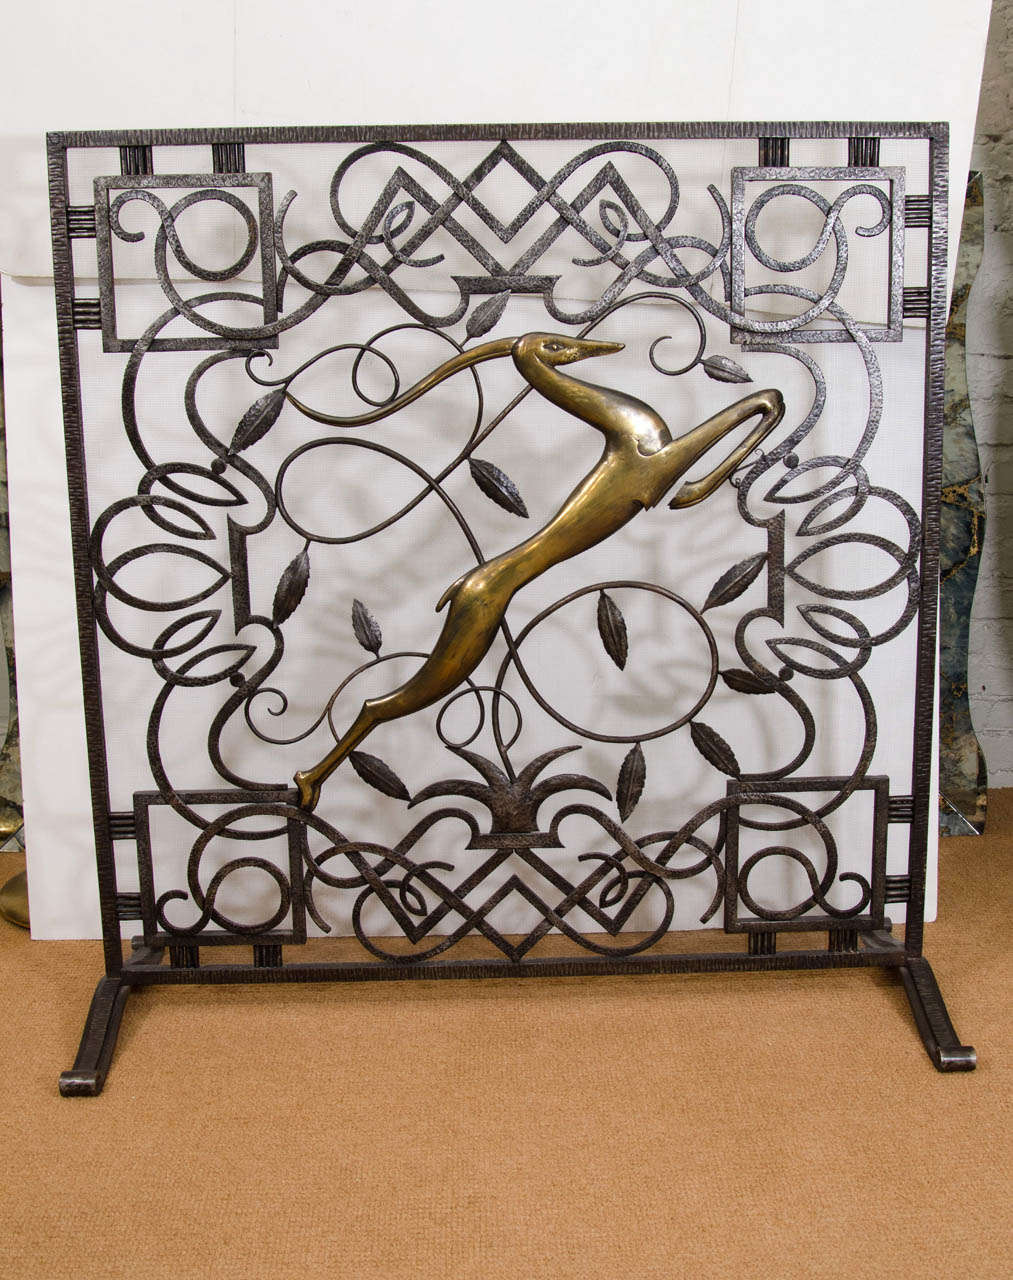 Elegant screen from deco era. Wonderful carved brass gazelle make this a one of a kind piece.

Dimensions listed are at maximal points of the screen - actual body of the main body of the screen are 38.5